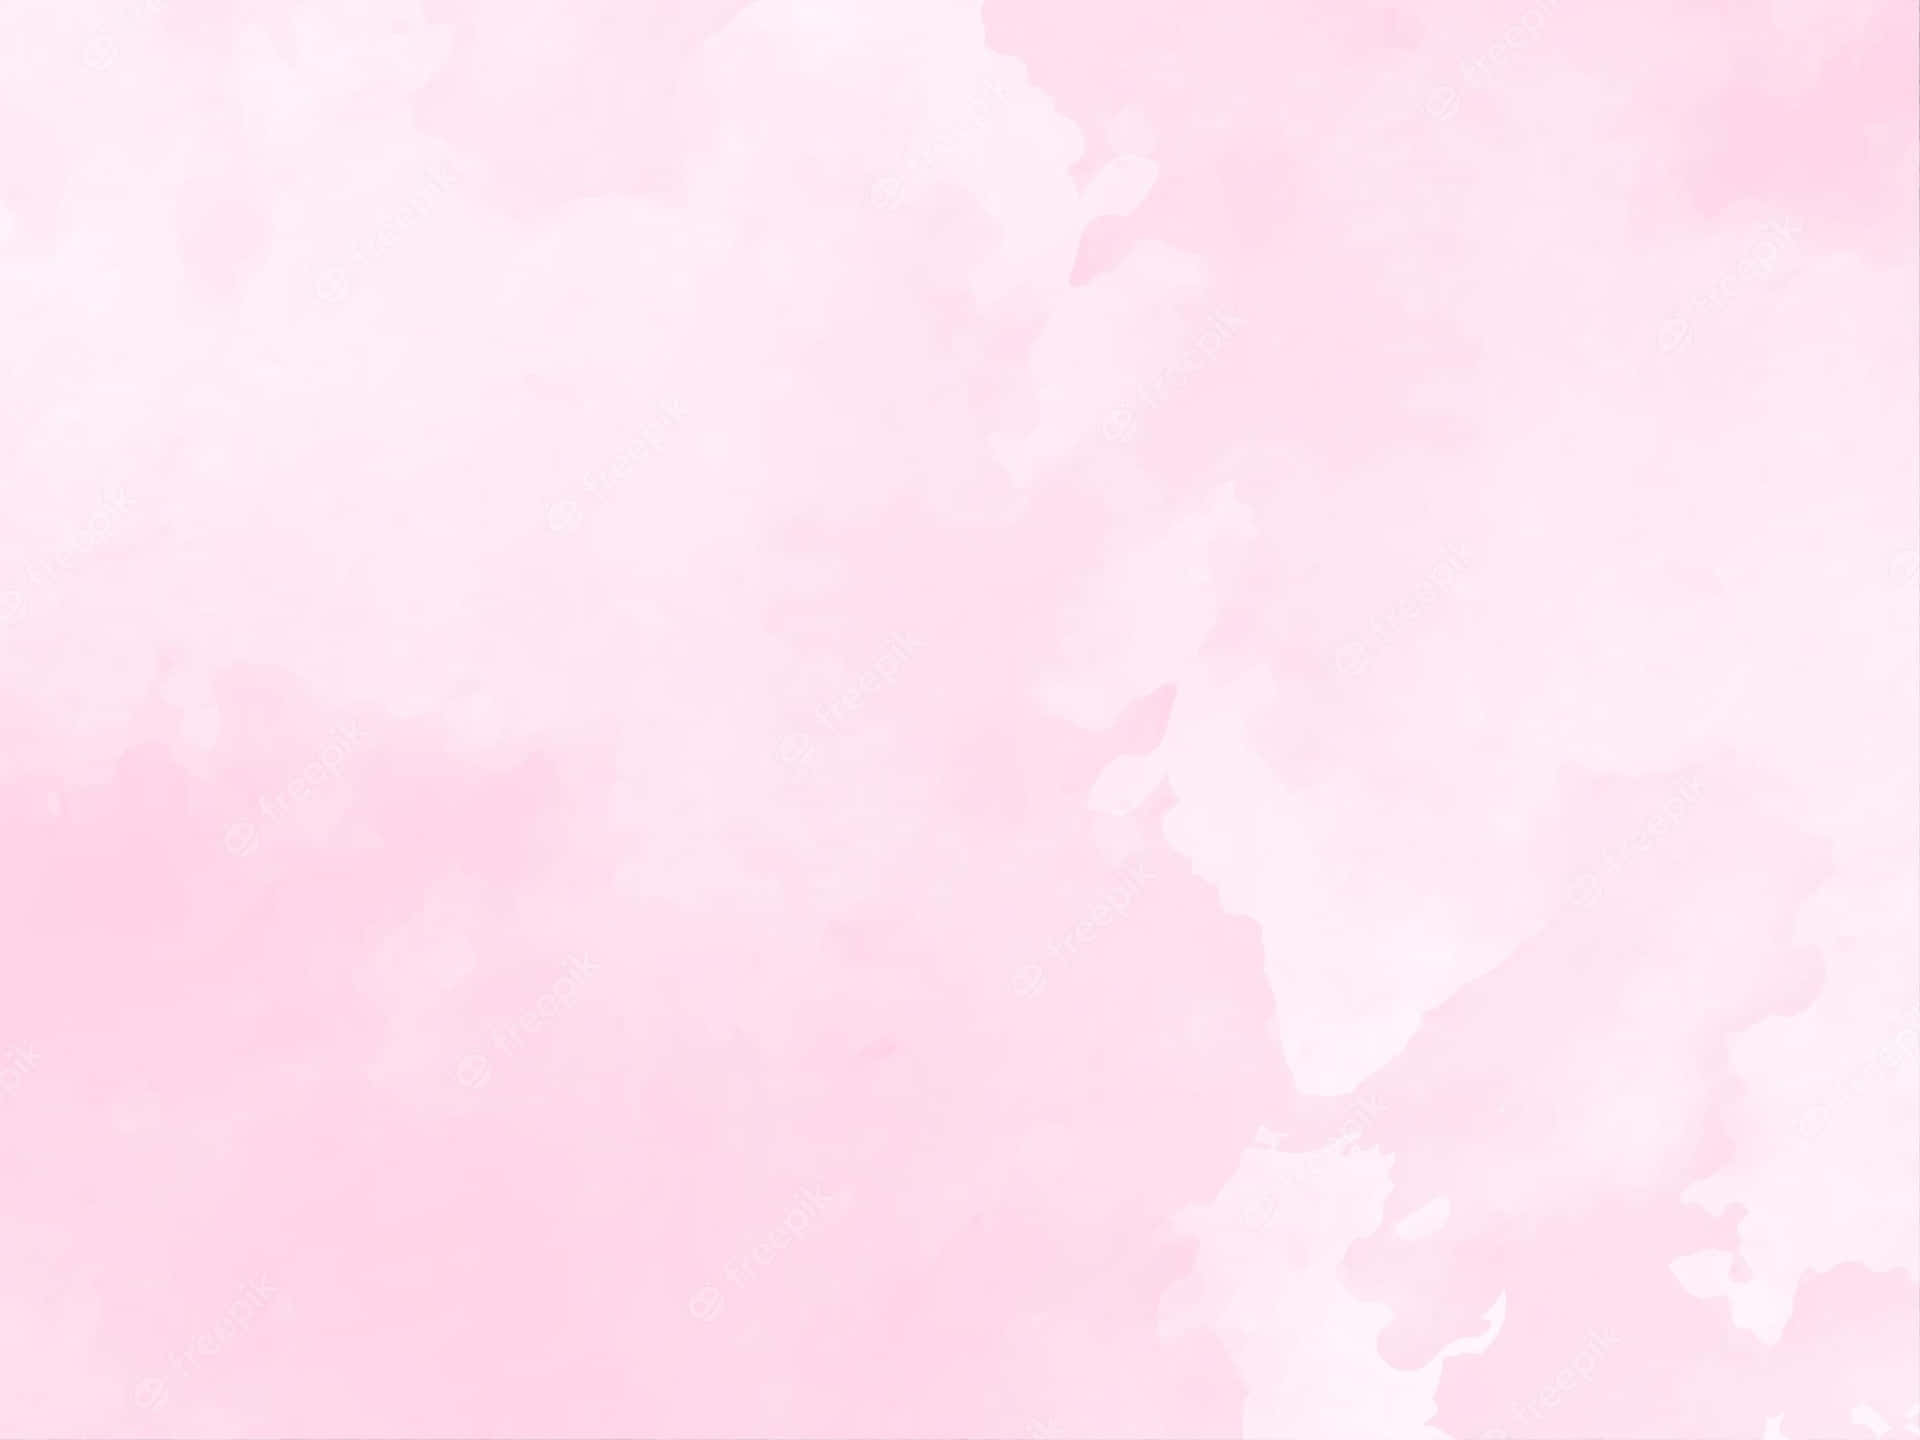 A Pink Watercolor Background With White Clouds